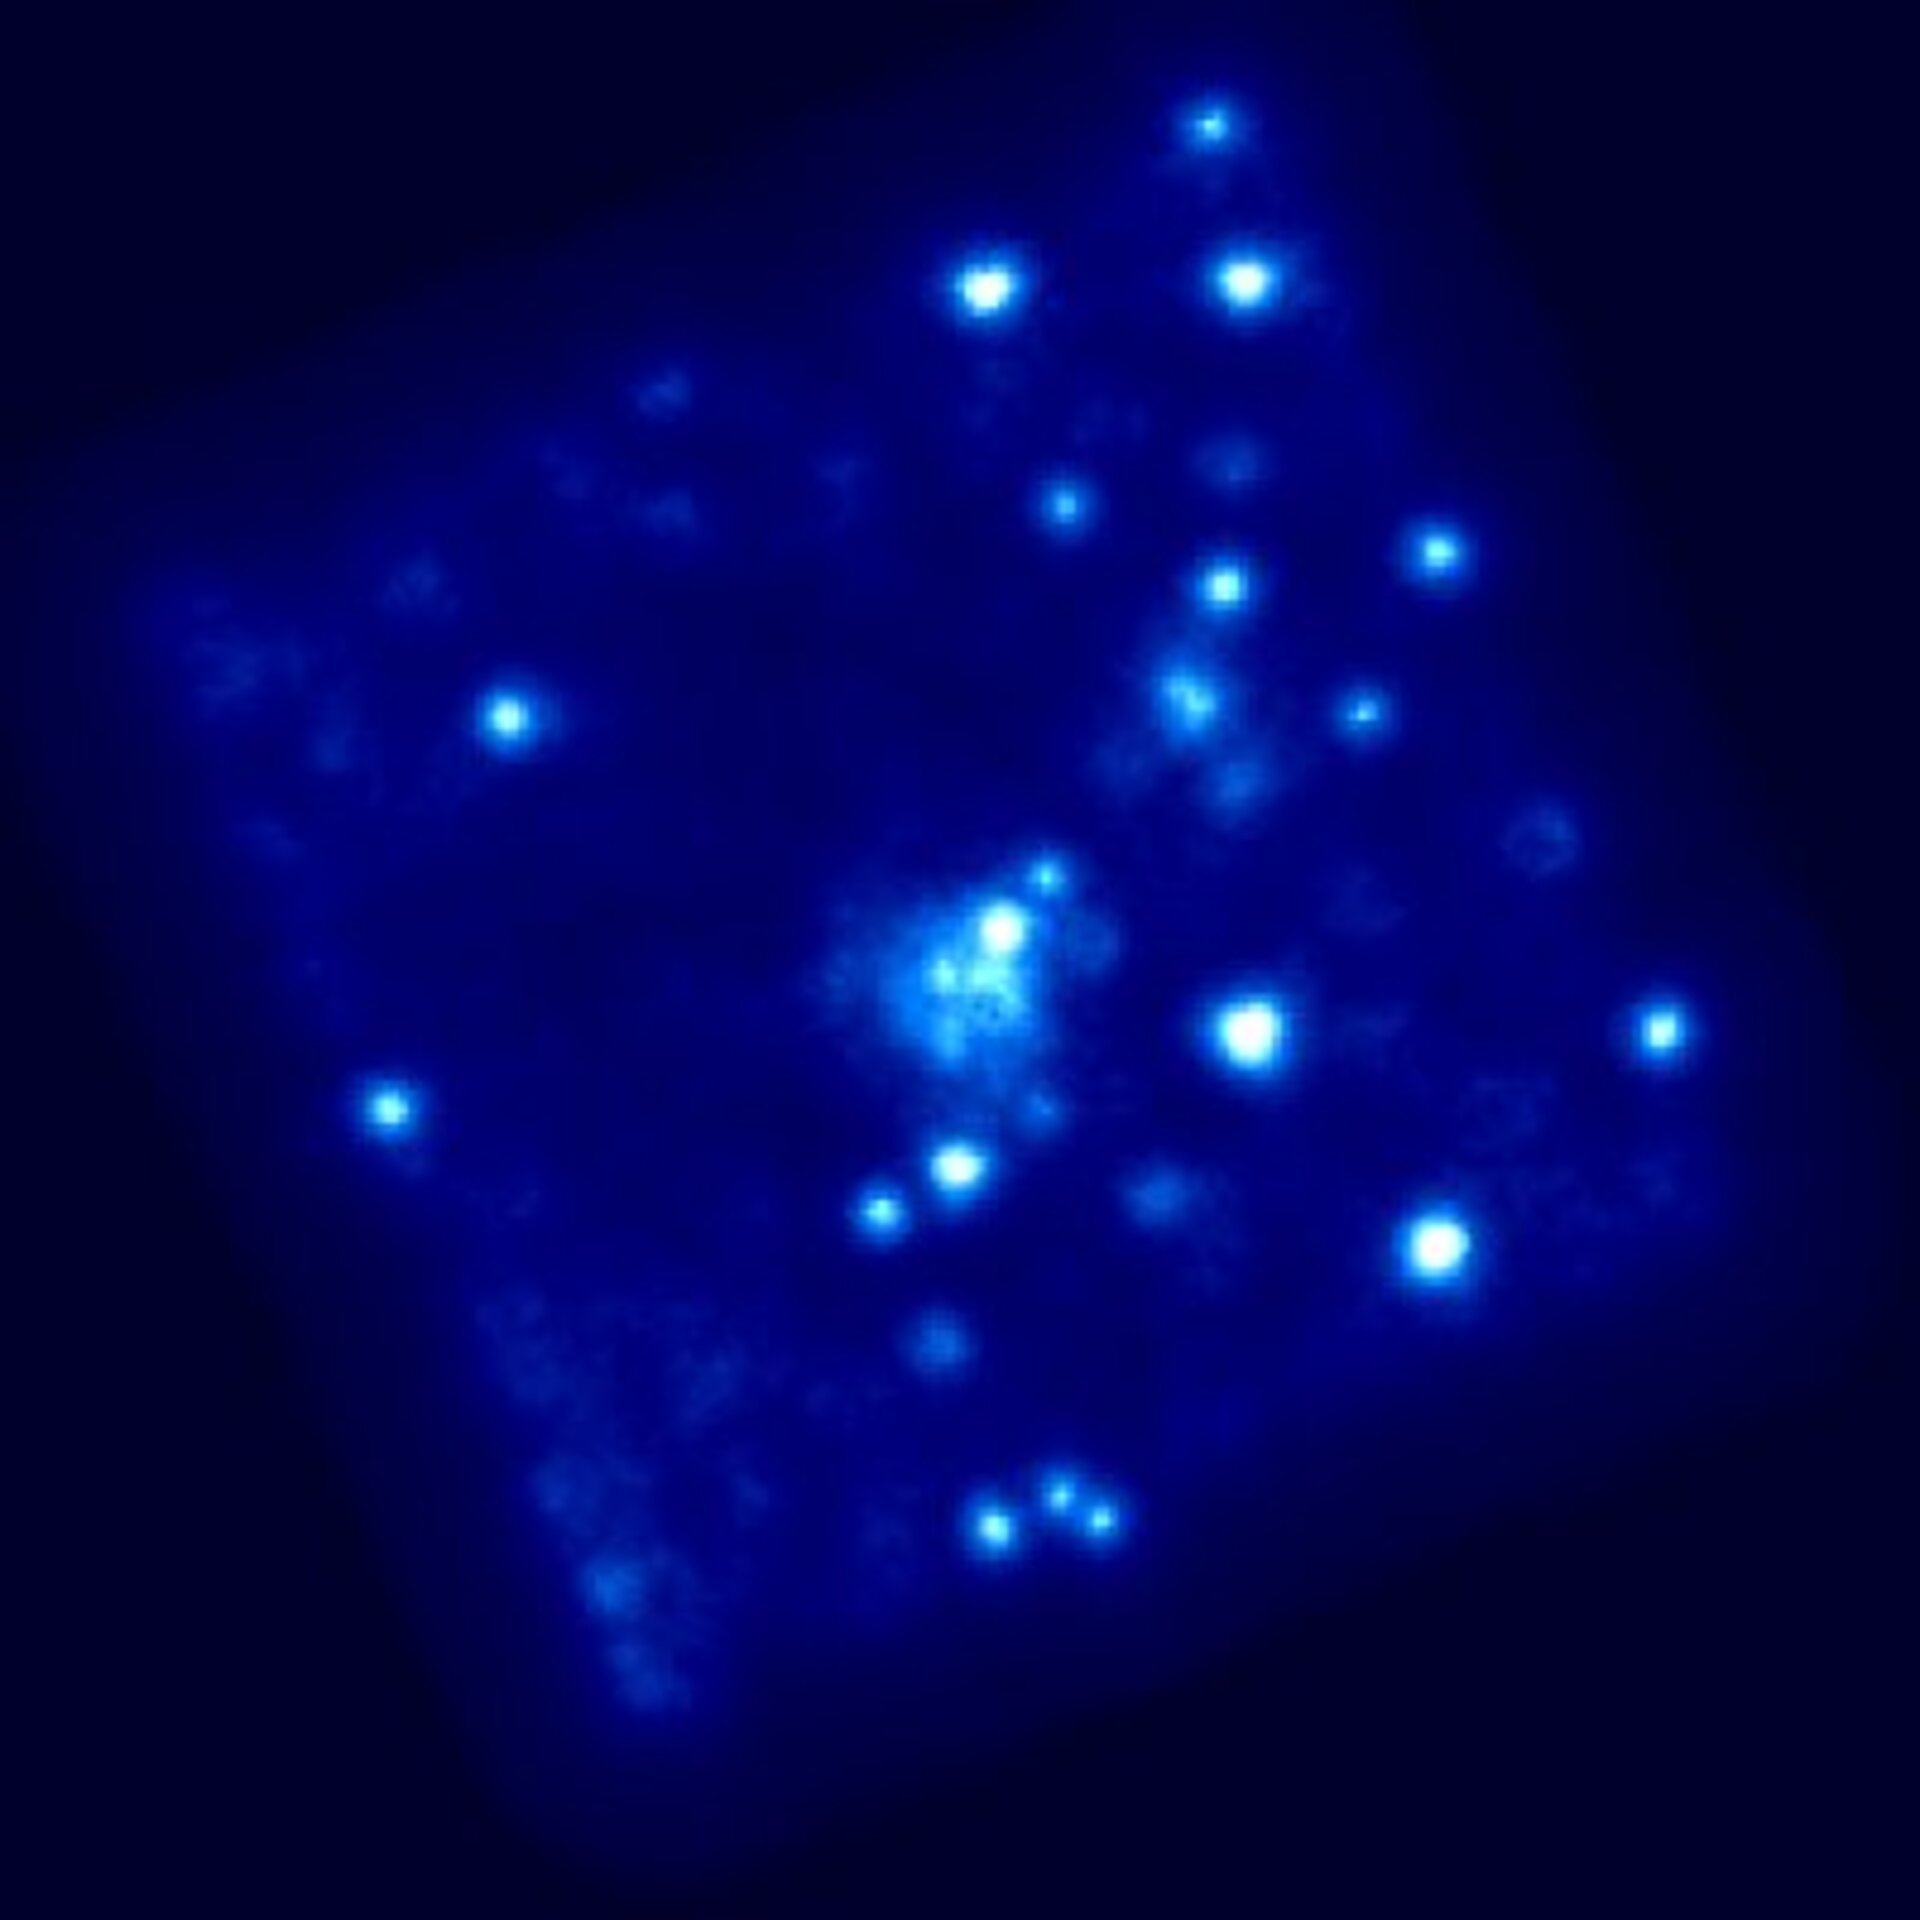 Distant galaxy cluster RXJ0847, as studied by XMM-Newton